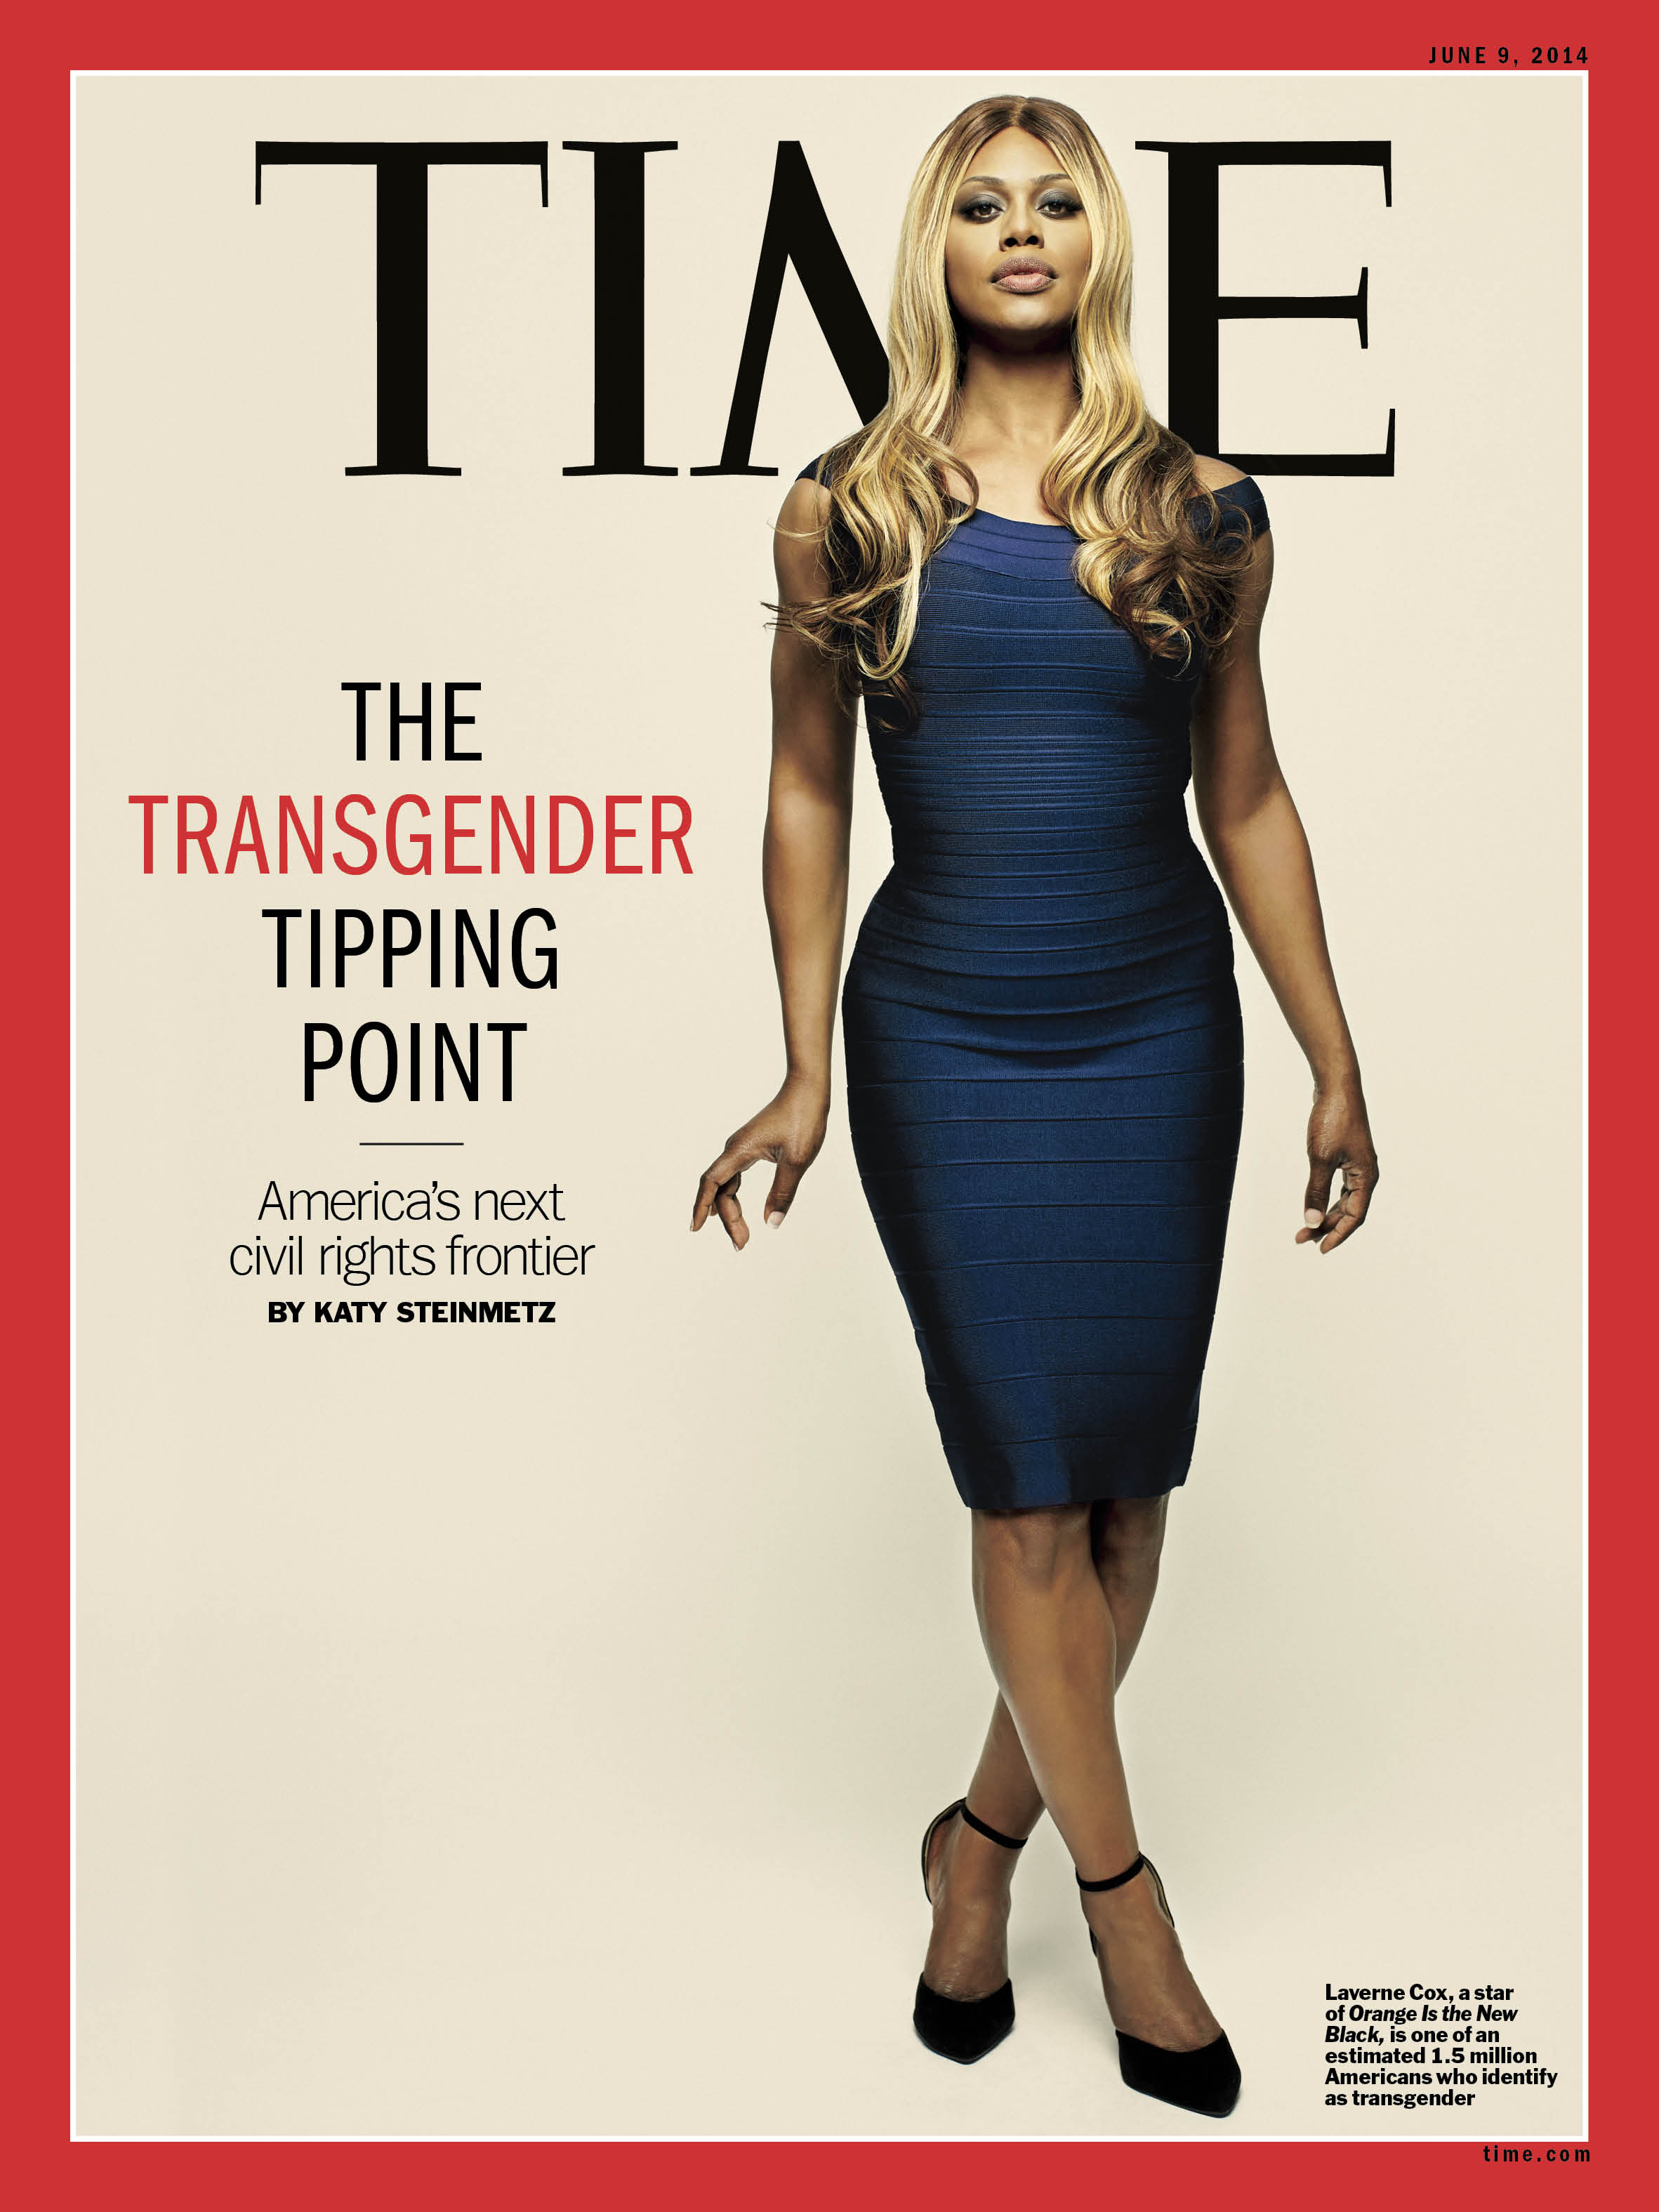 Laverne Cox on the cover of TIME, 2014 (Photograph by Peter Hapak for TIME)